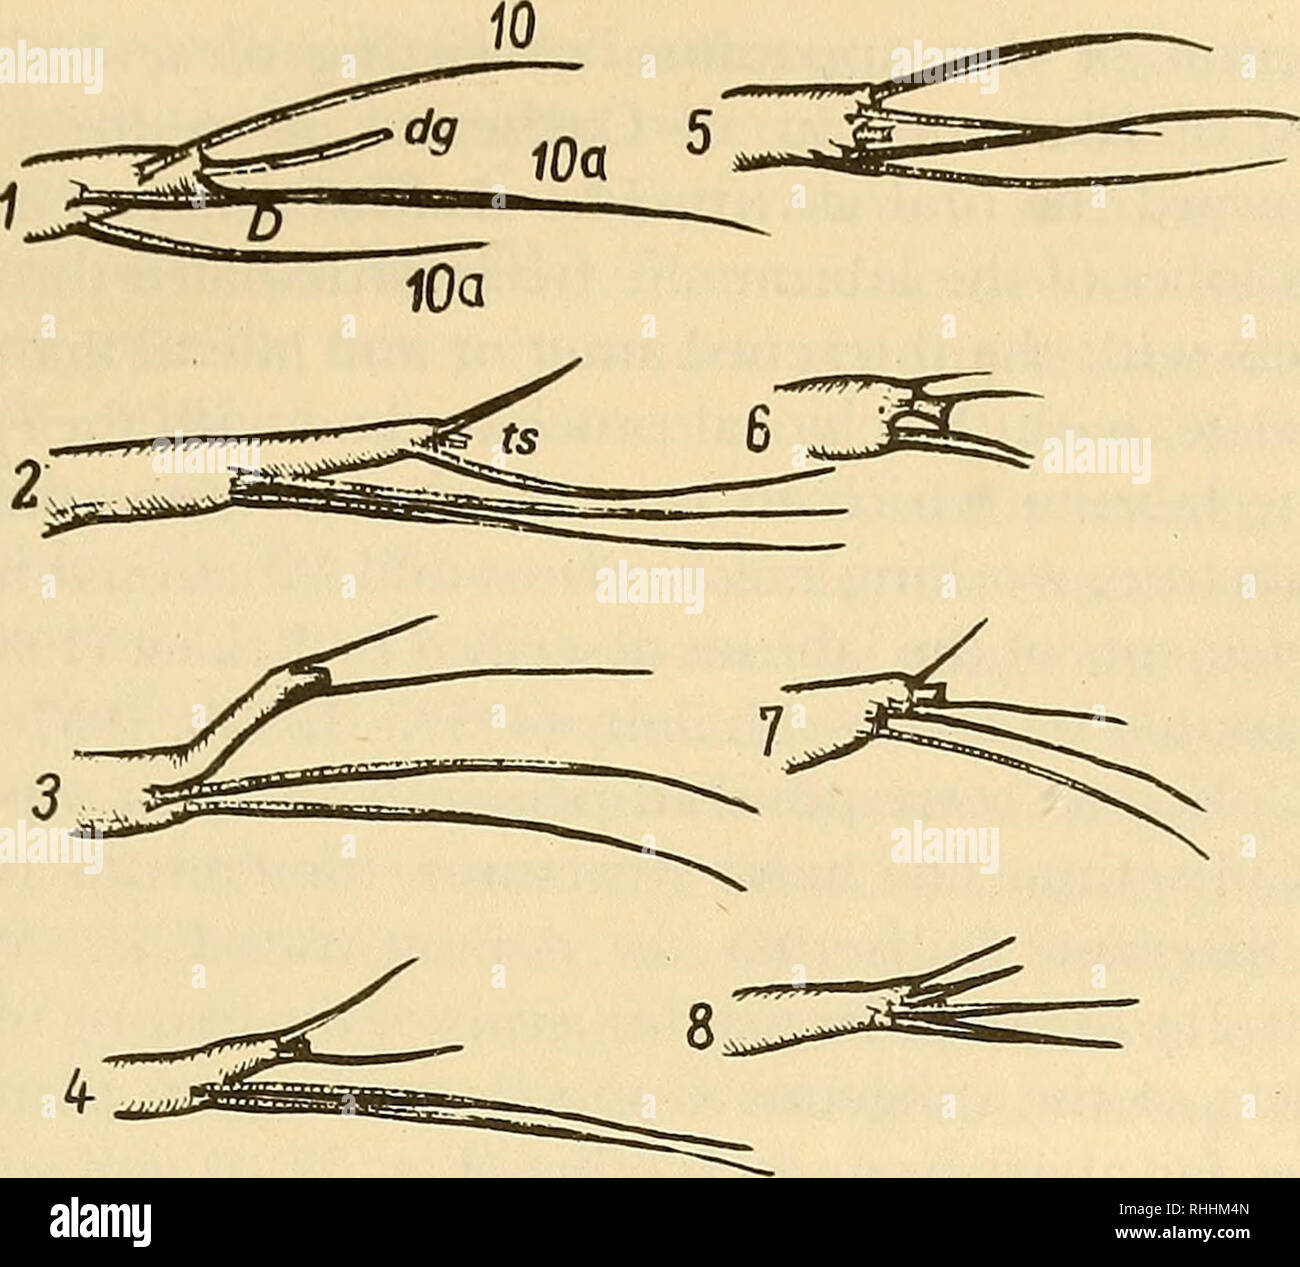 . Blood-sucking mosquitoes of the subtribe Culisetina (Diptera, Culicidae) in world fauna. Mosquitoes. 63. Fig. 35. Structure and types (1-8) of apical antennal appendages. -Dolabriform appendage; dg—digitate appendage; ts—terminal spine; 10—terminal spinule (tsp); 10a—subterminal spinule (stsp). have been conducted on the structure and functioning of the mouth apparatus of Anopheles larvae and certain species of Culex and Aedes. In a special publication describing a detailed study of the mouth parts of Culiseta incidens larvae (Cook, 1949), there is an excellent description of the muscle syst Stock Photo